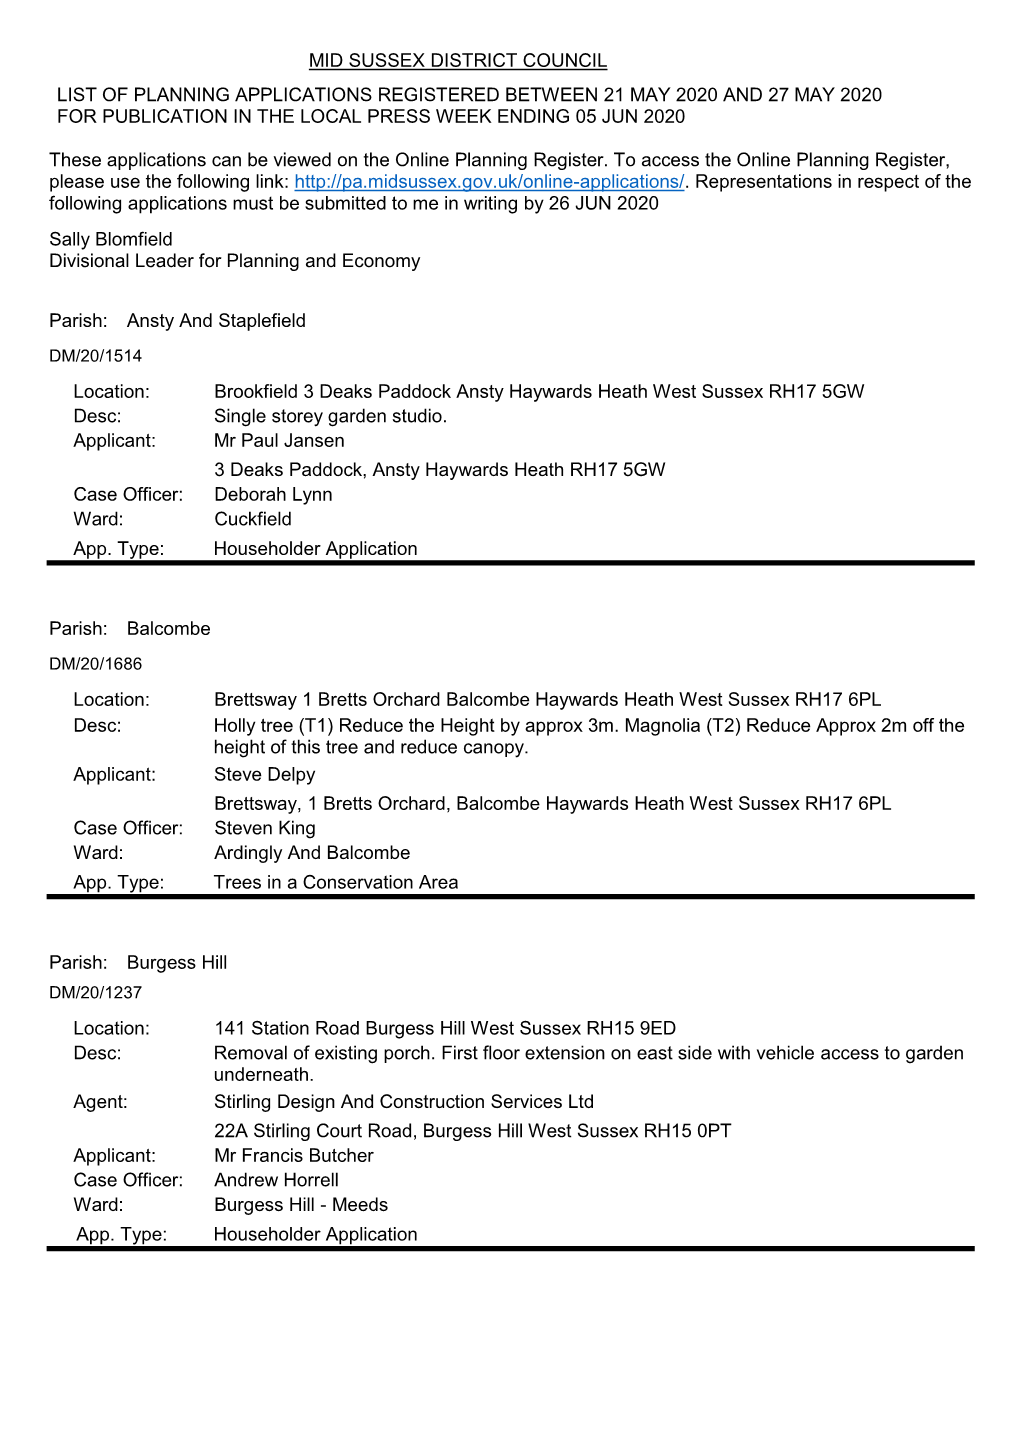 Mid Sussex District Council List of Planning Applications Registered Between 21 May 2020 and 27 May 2020 for Publication in the Local Press Week Ending 05 Jun 2020